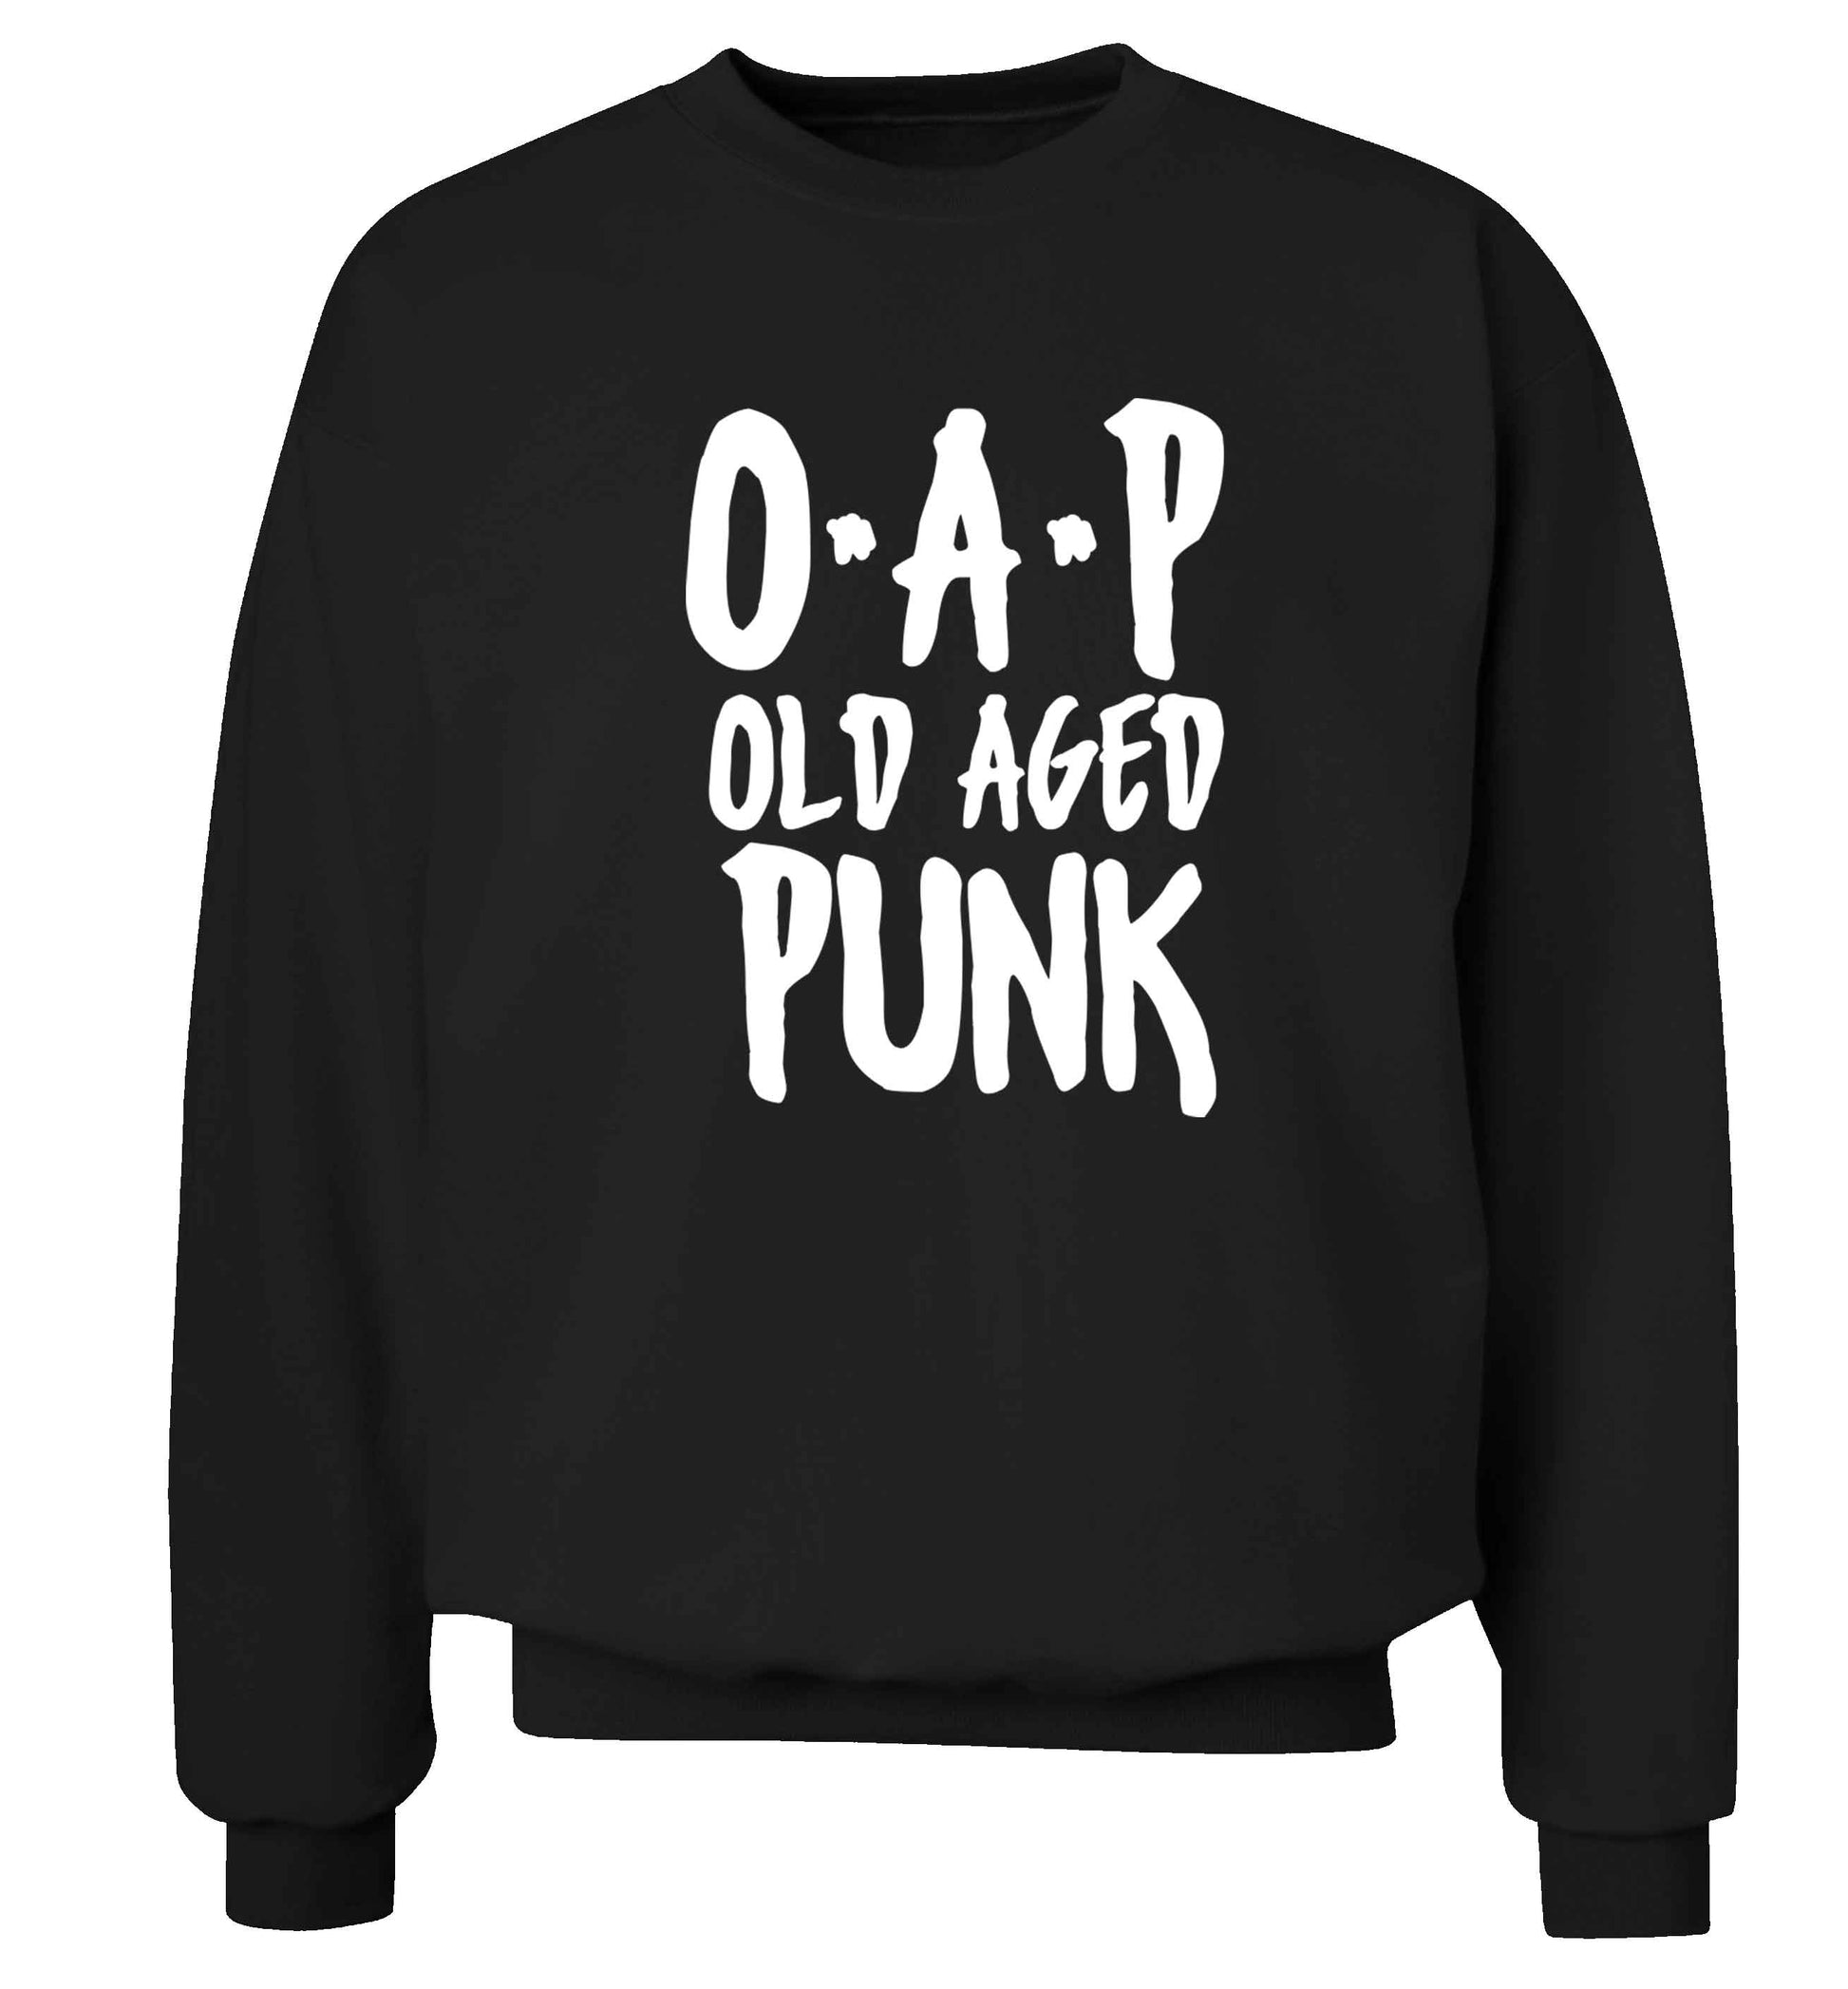 O.A.P Old Age Punk Adult's unisex black Sweater 2XL